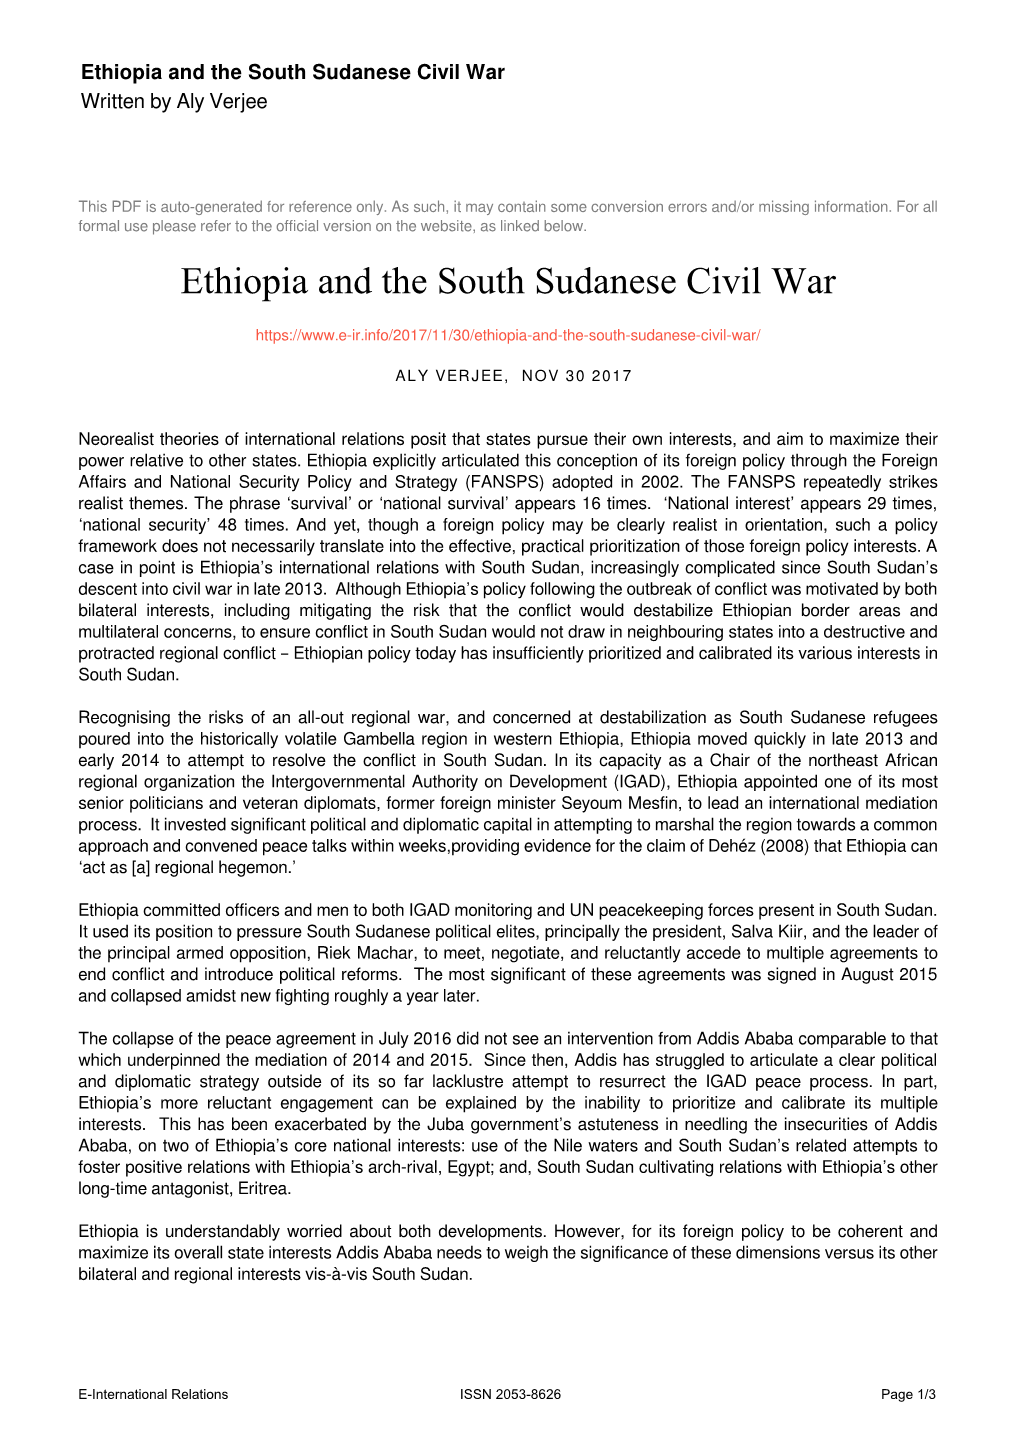 Ethiopia and the South Sudanese Civil War Written by Aly Verjee